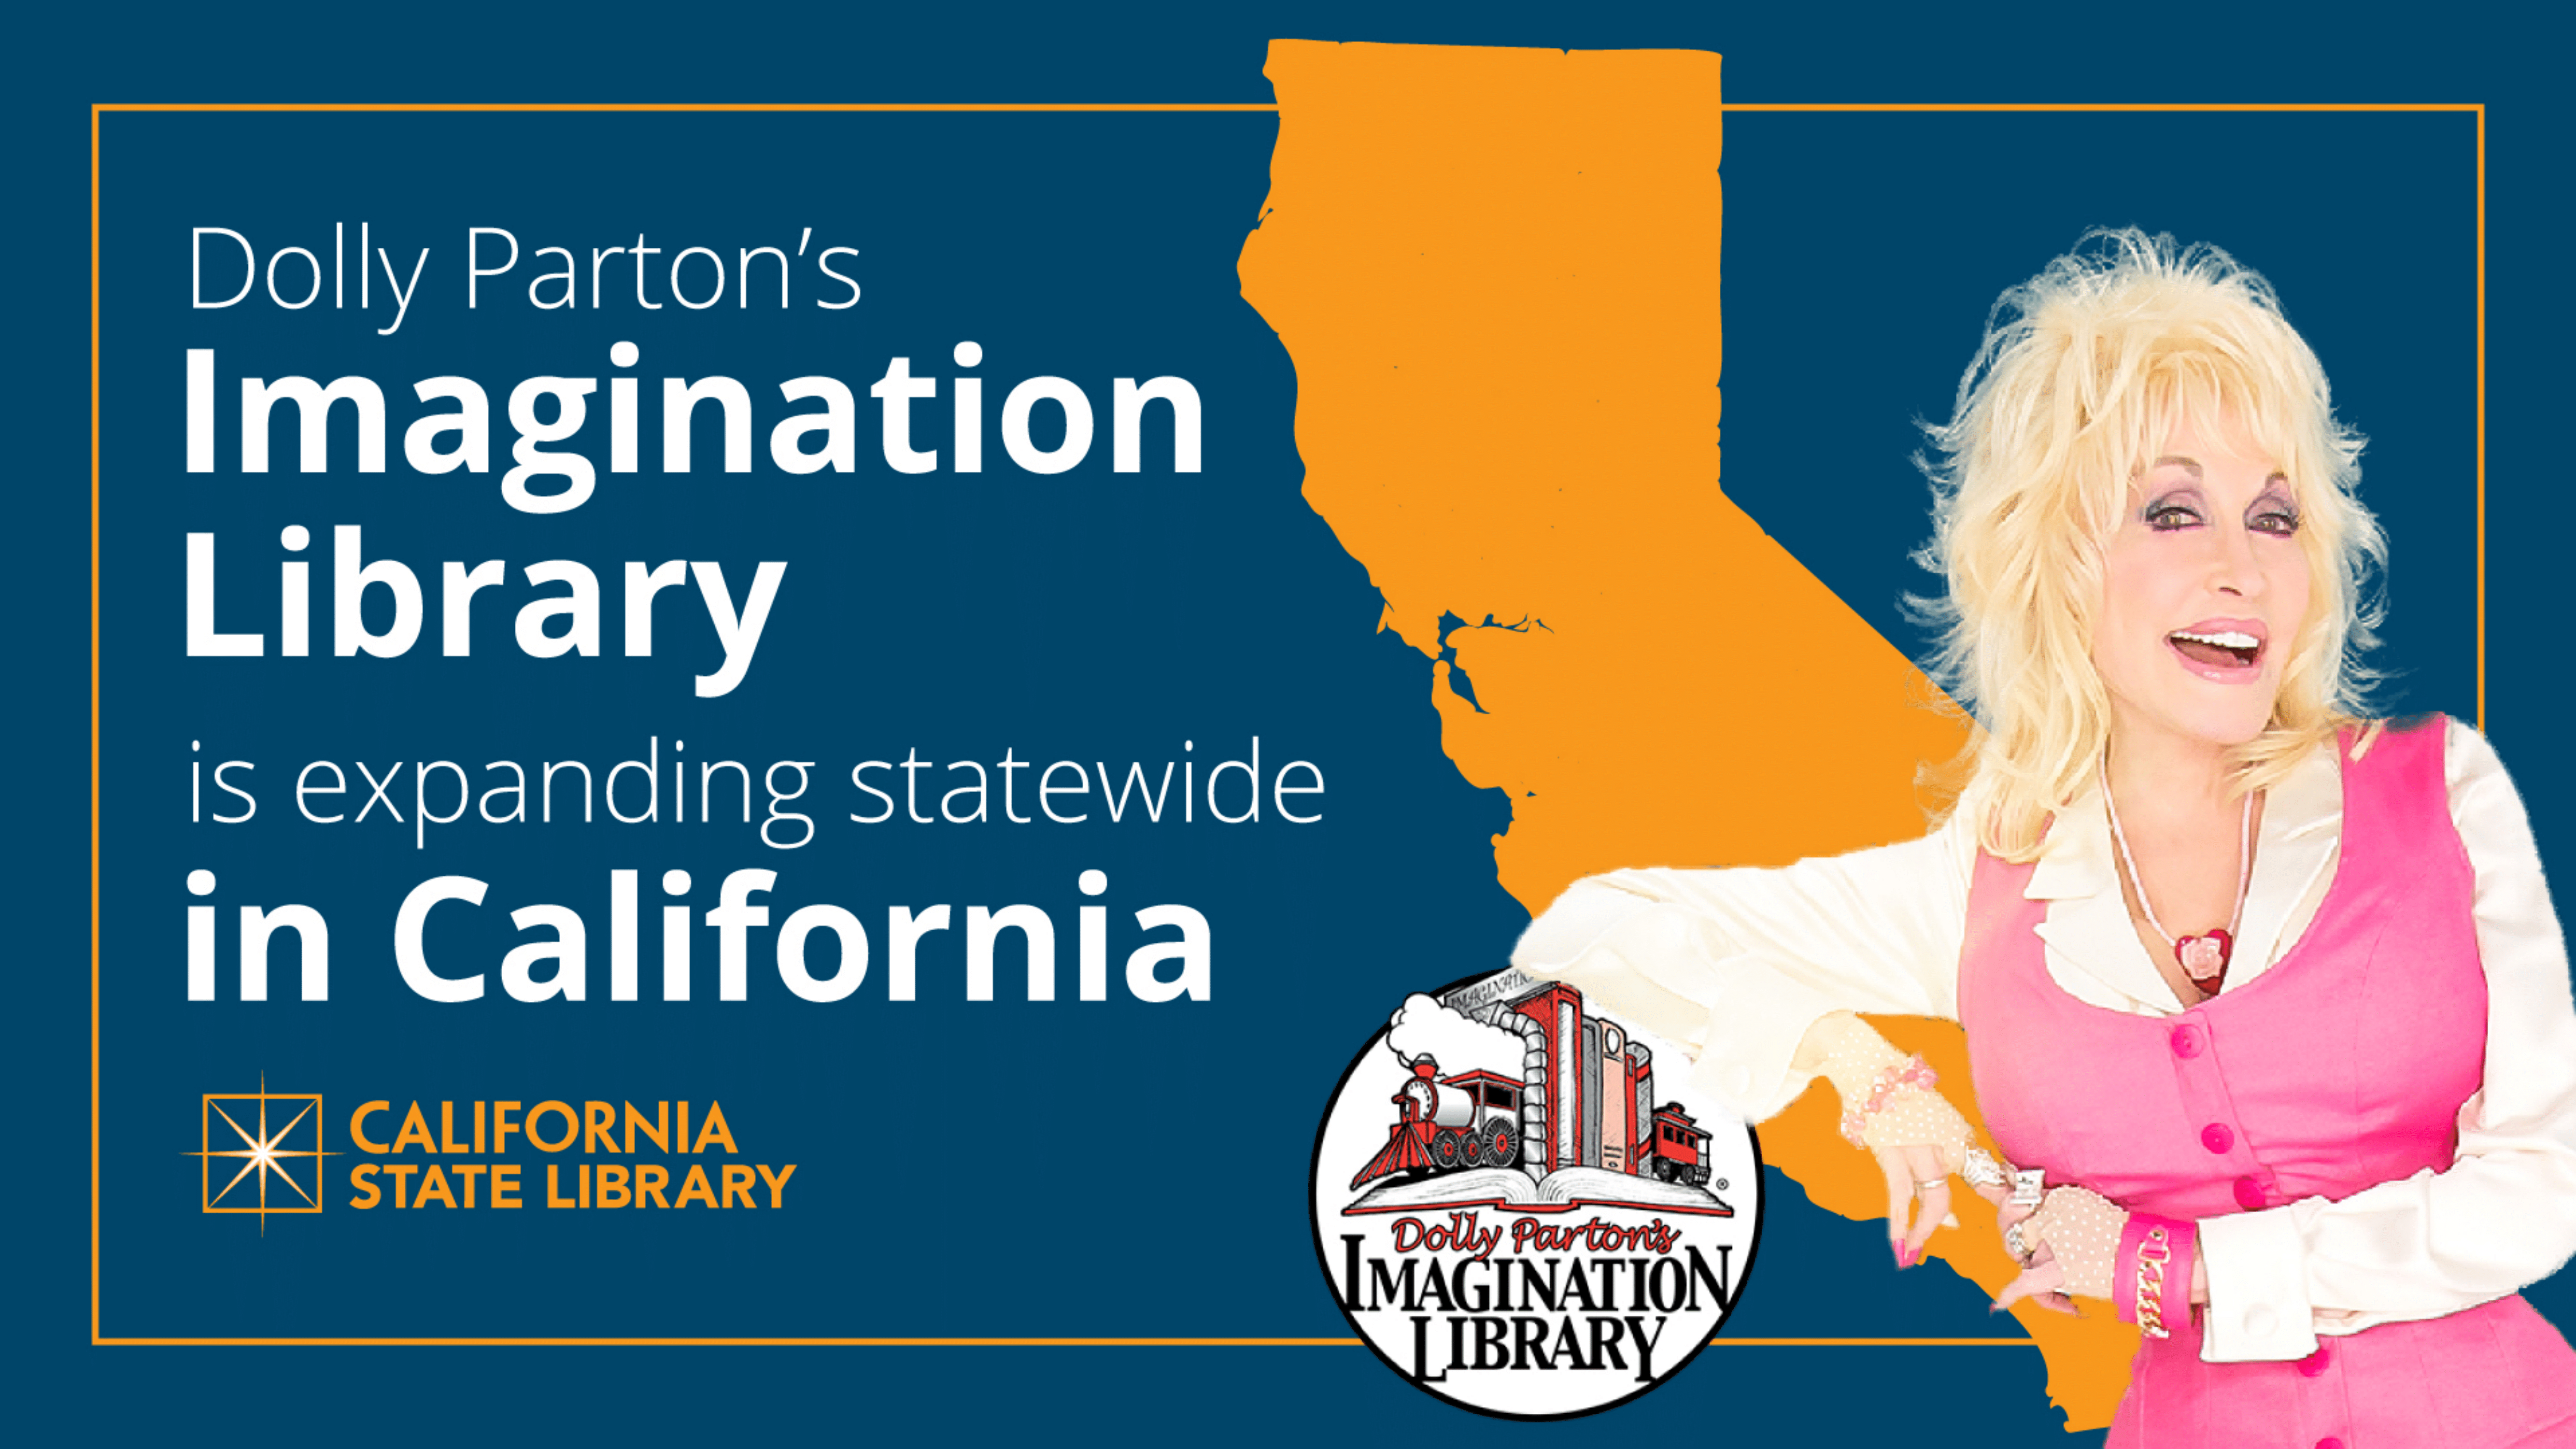 Text Dolly Parton's imagination library is expanding statewide in California with California State Library logo and image of Dolly